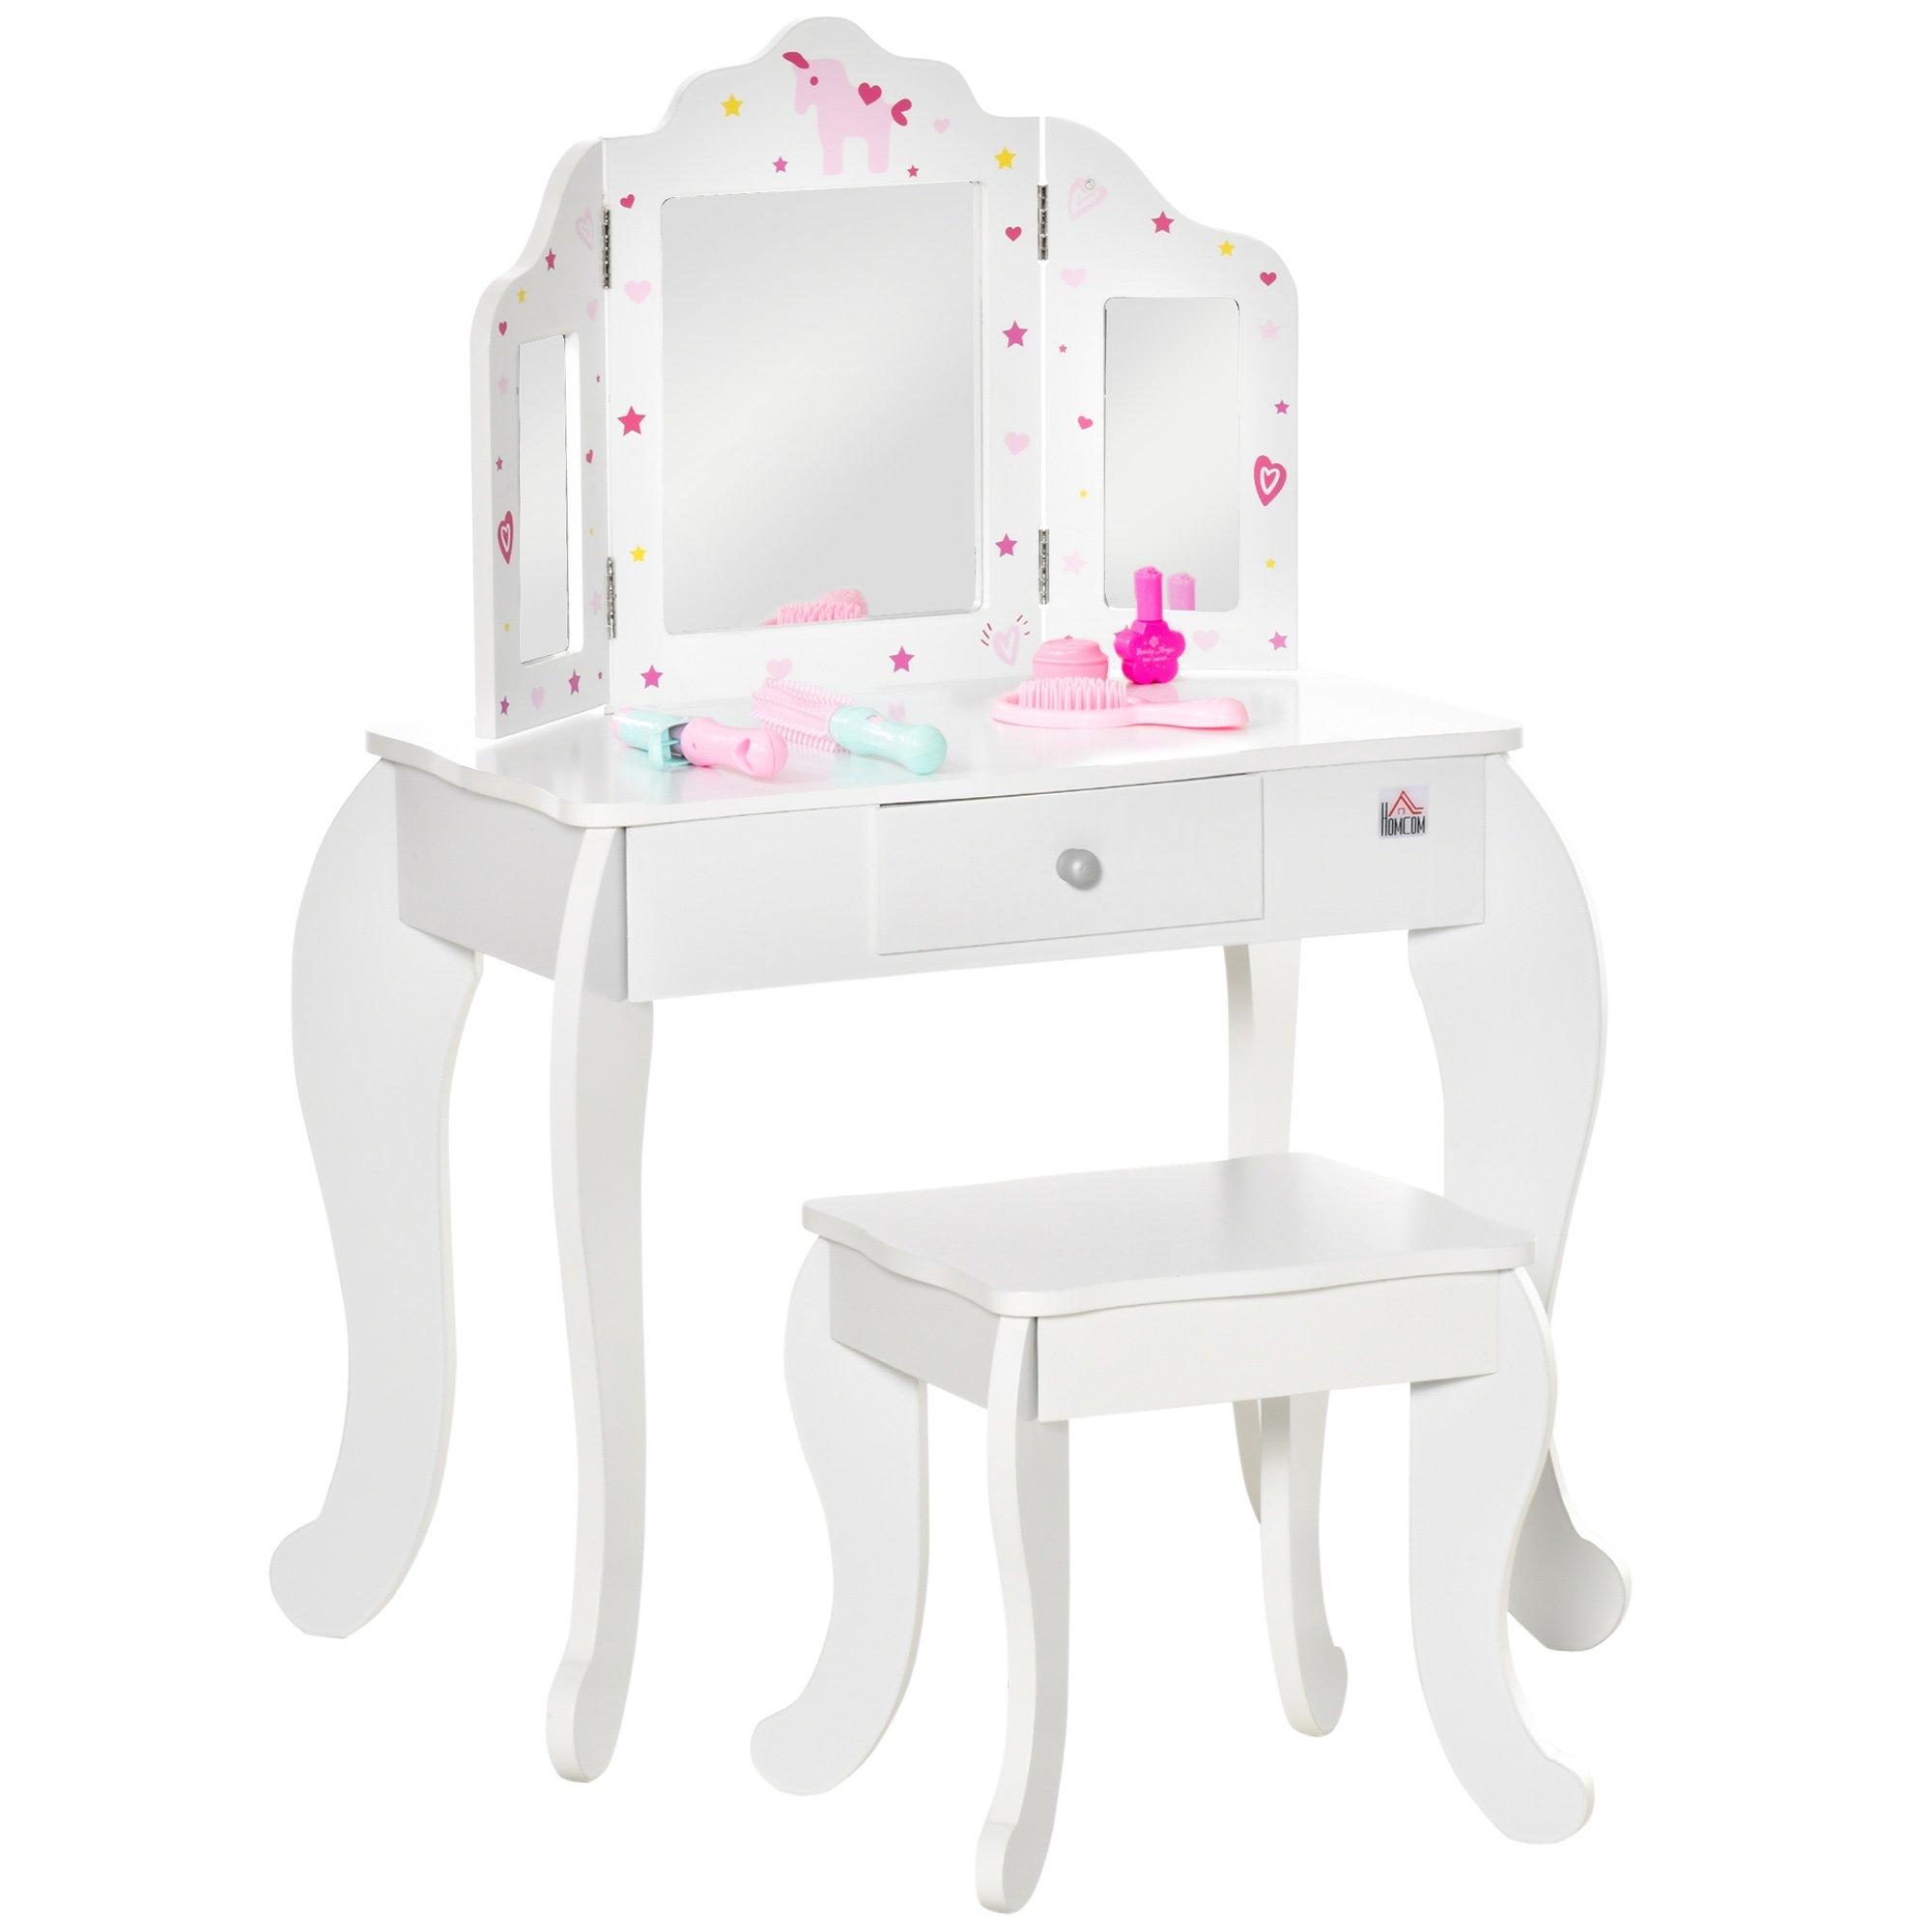 Kids Vanity Table & Stool Girls Dressing Set with Rotatable Mirror Drawer